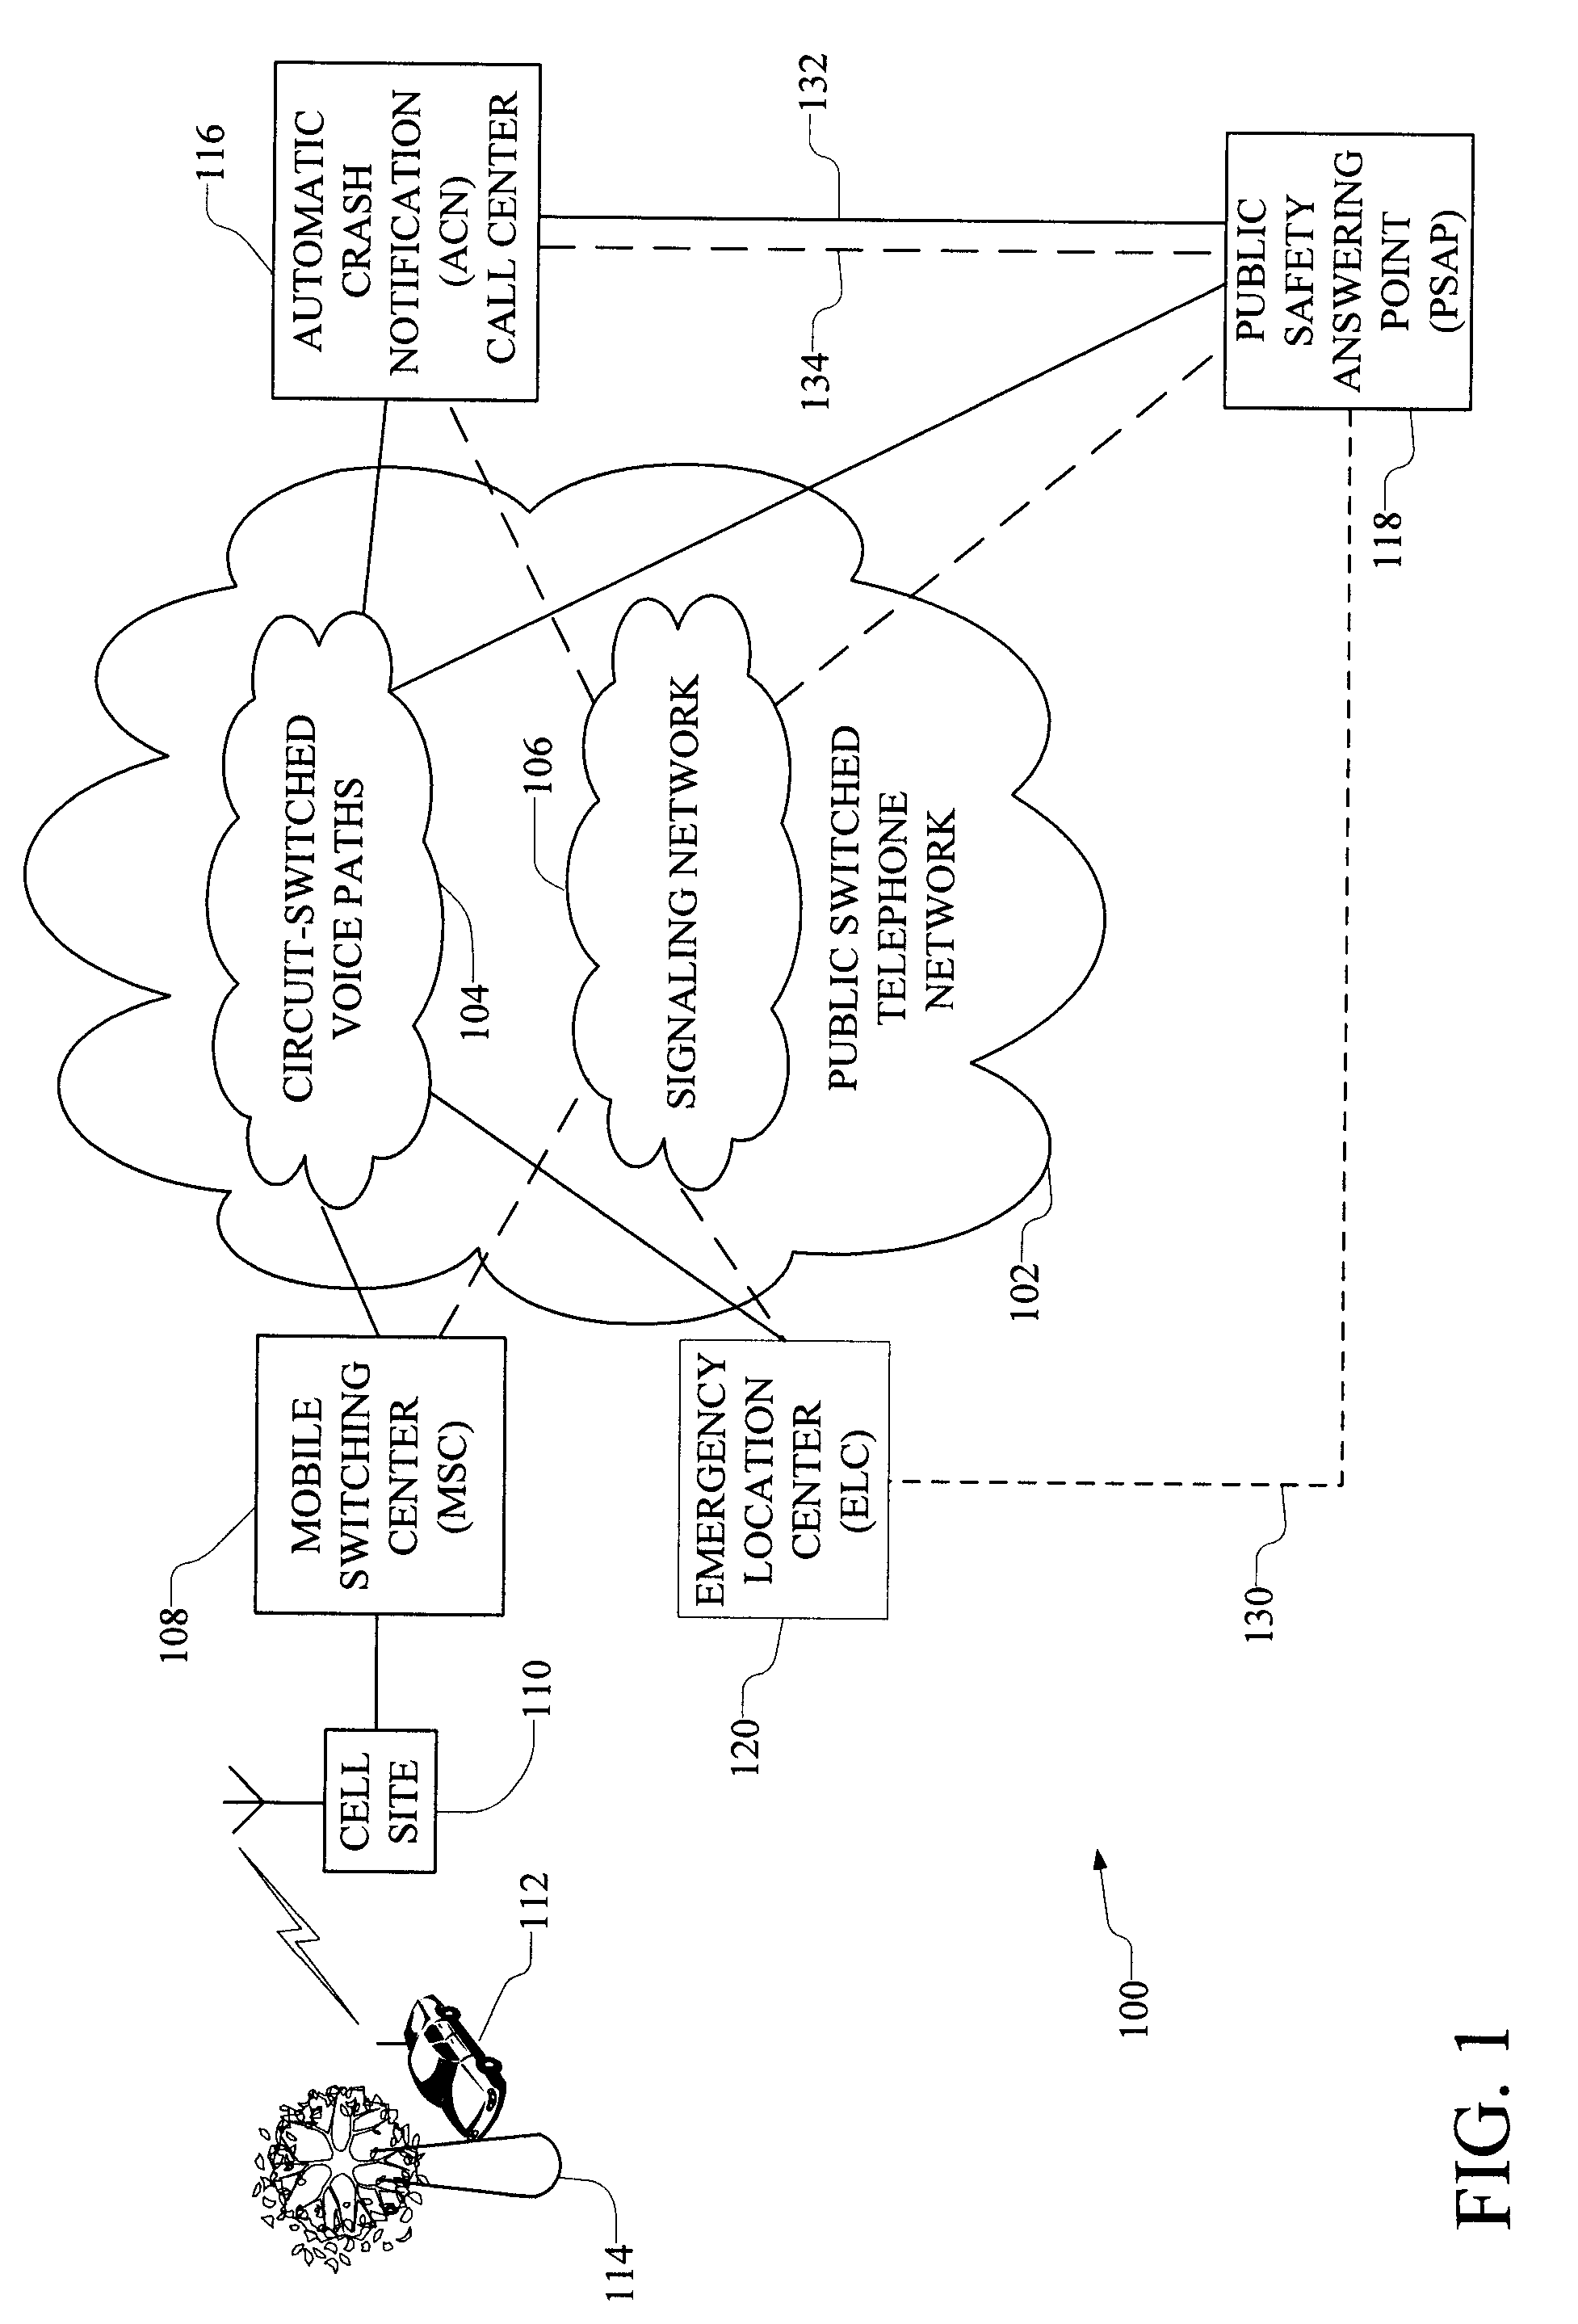 Automatic Routing of In-Vehicle Emergency Calls to Automatic Crash Notification Services and to Public Safety Answering Points